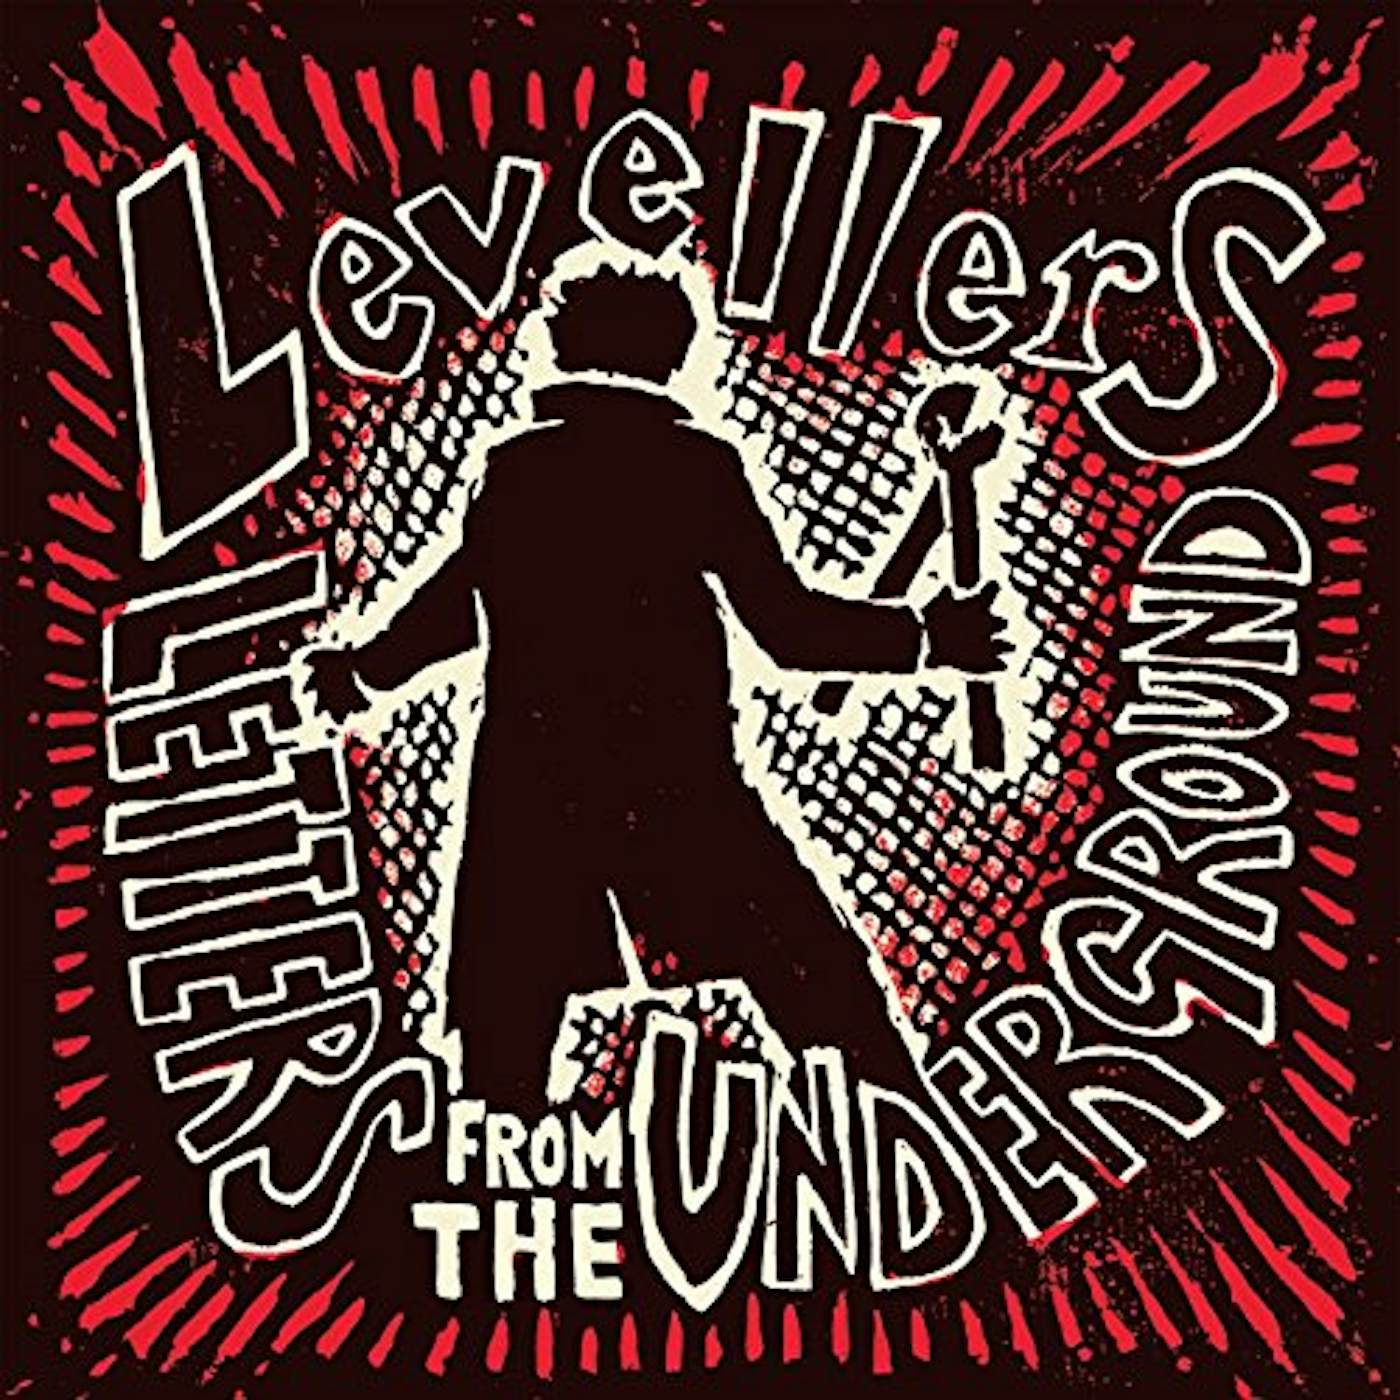 Levellers LETTERS FROM THE UNDERGROUND: DELUXE CD